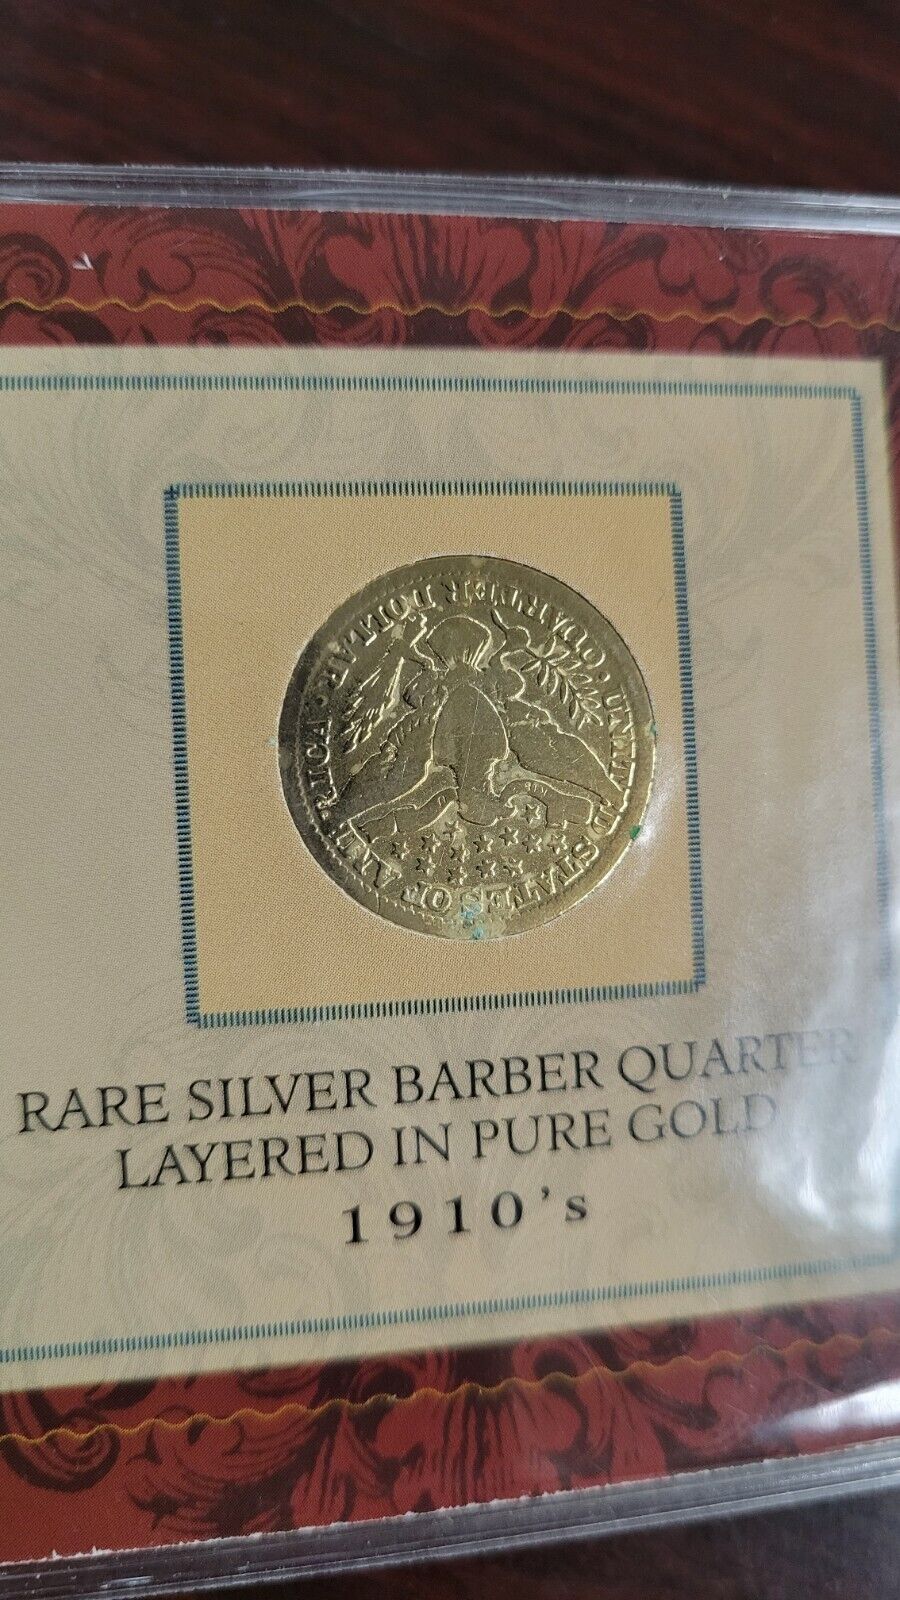 1910's Silver Barber Quarter Layered In Pure Gold - 1912